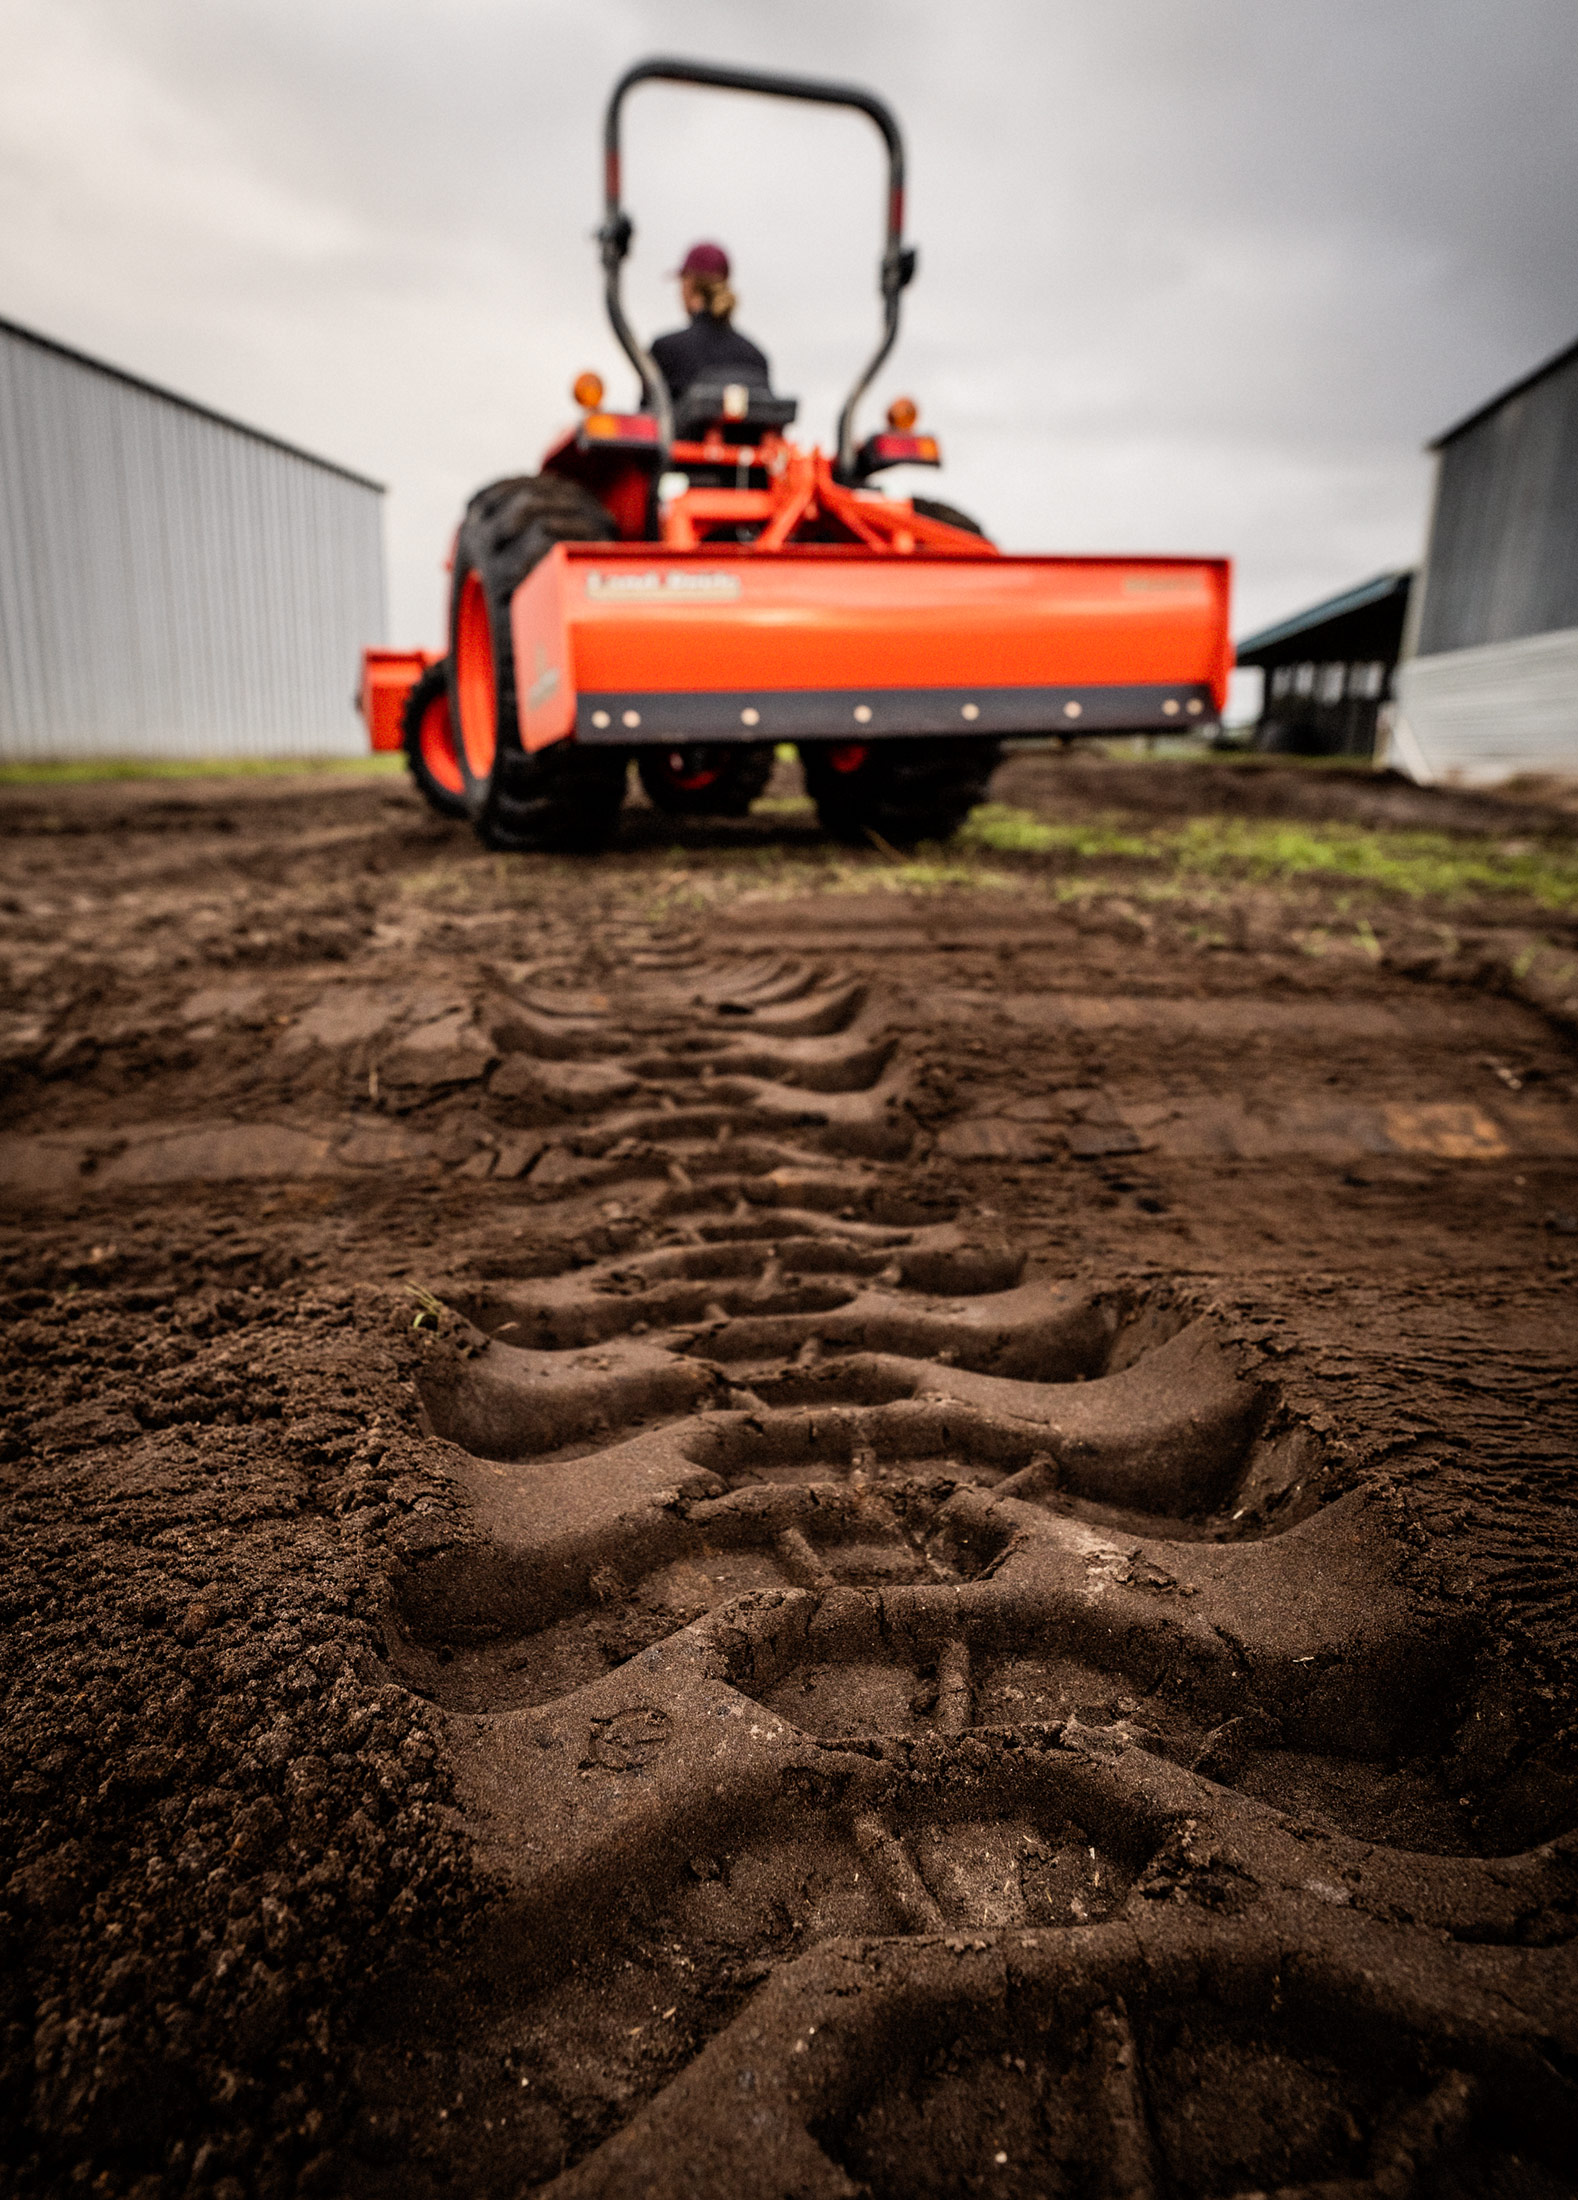 Tractor Tire Tread in Dirt Photo